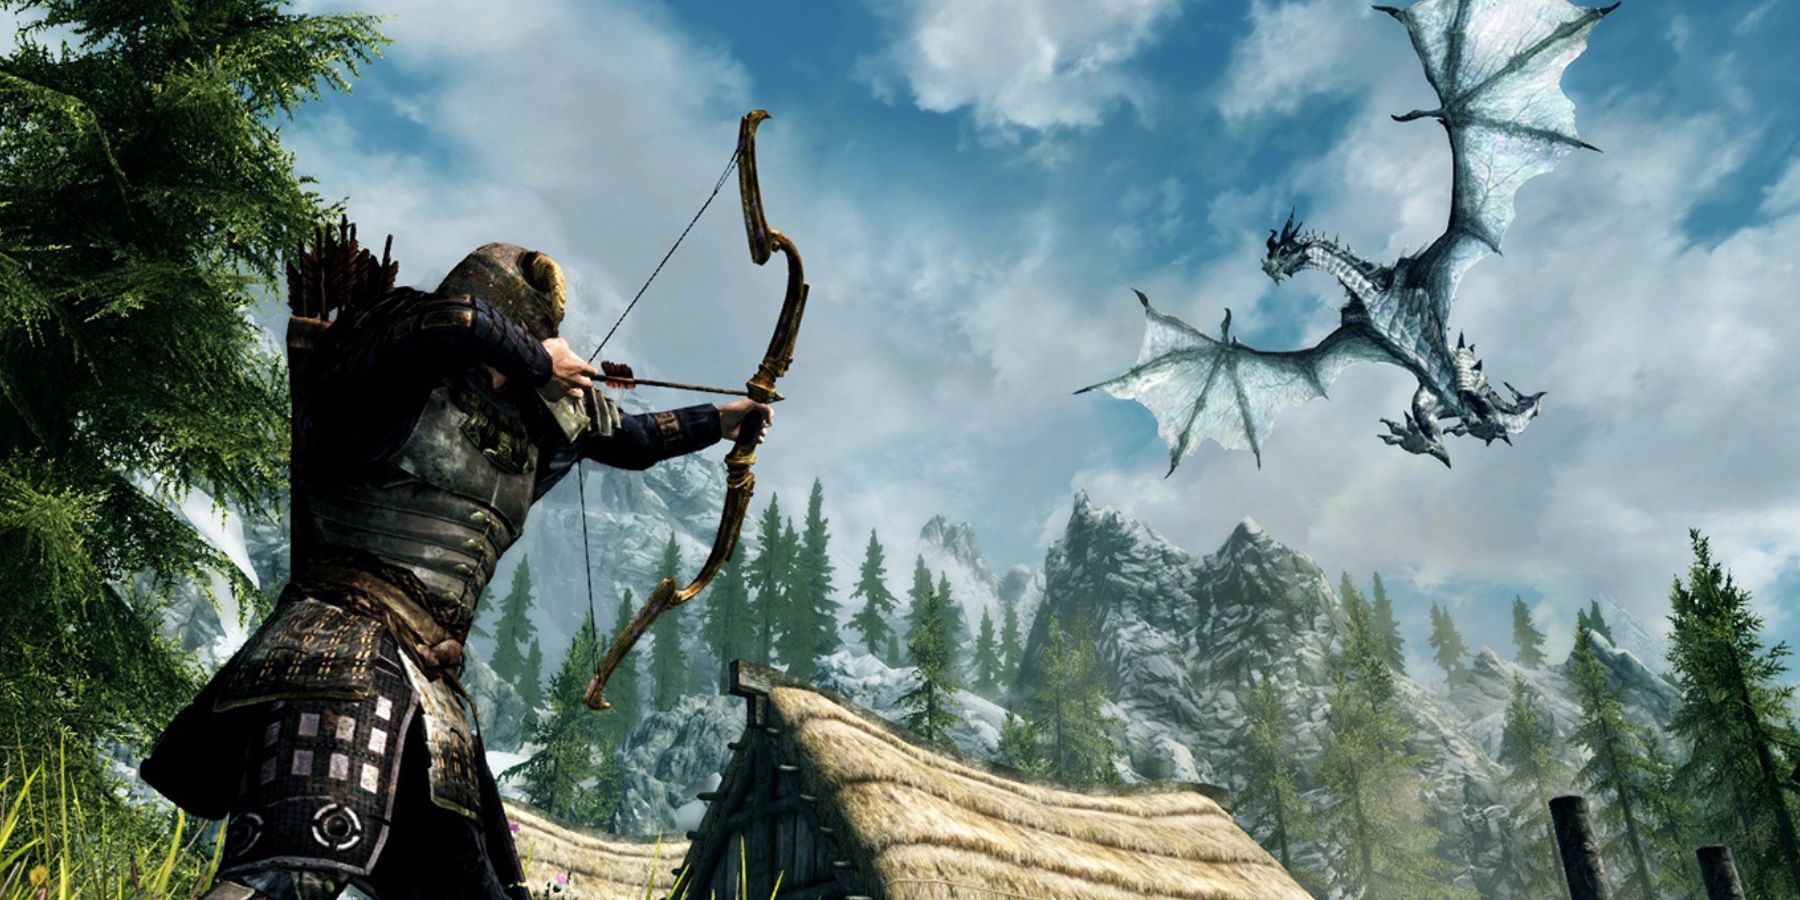 Useful Skyrim cheats allow players to increase their modification skills quickly and early